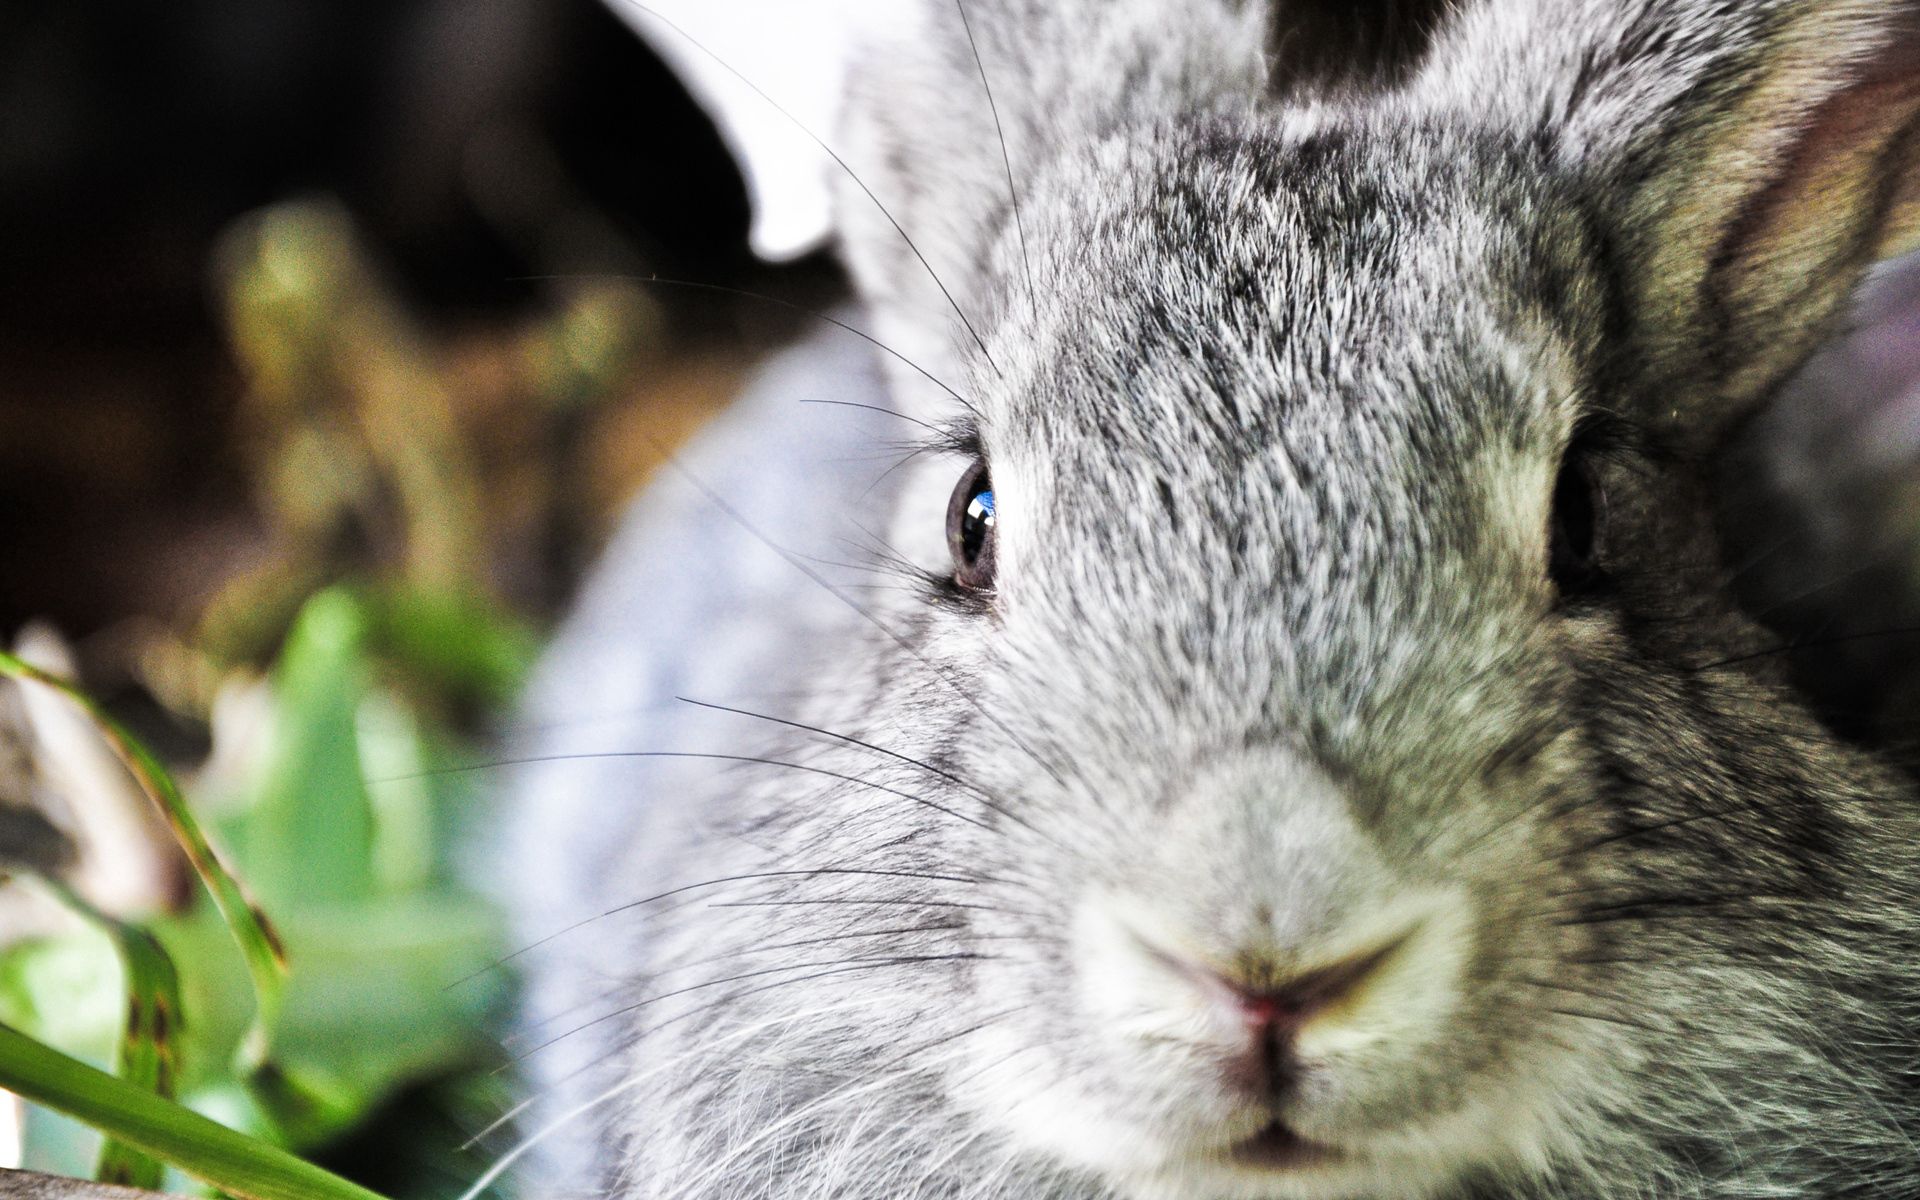 69146 download wallpaper animals, muzzle, ears, nose, rabbit screensavers and pictures for free